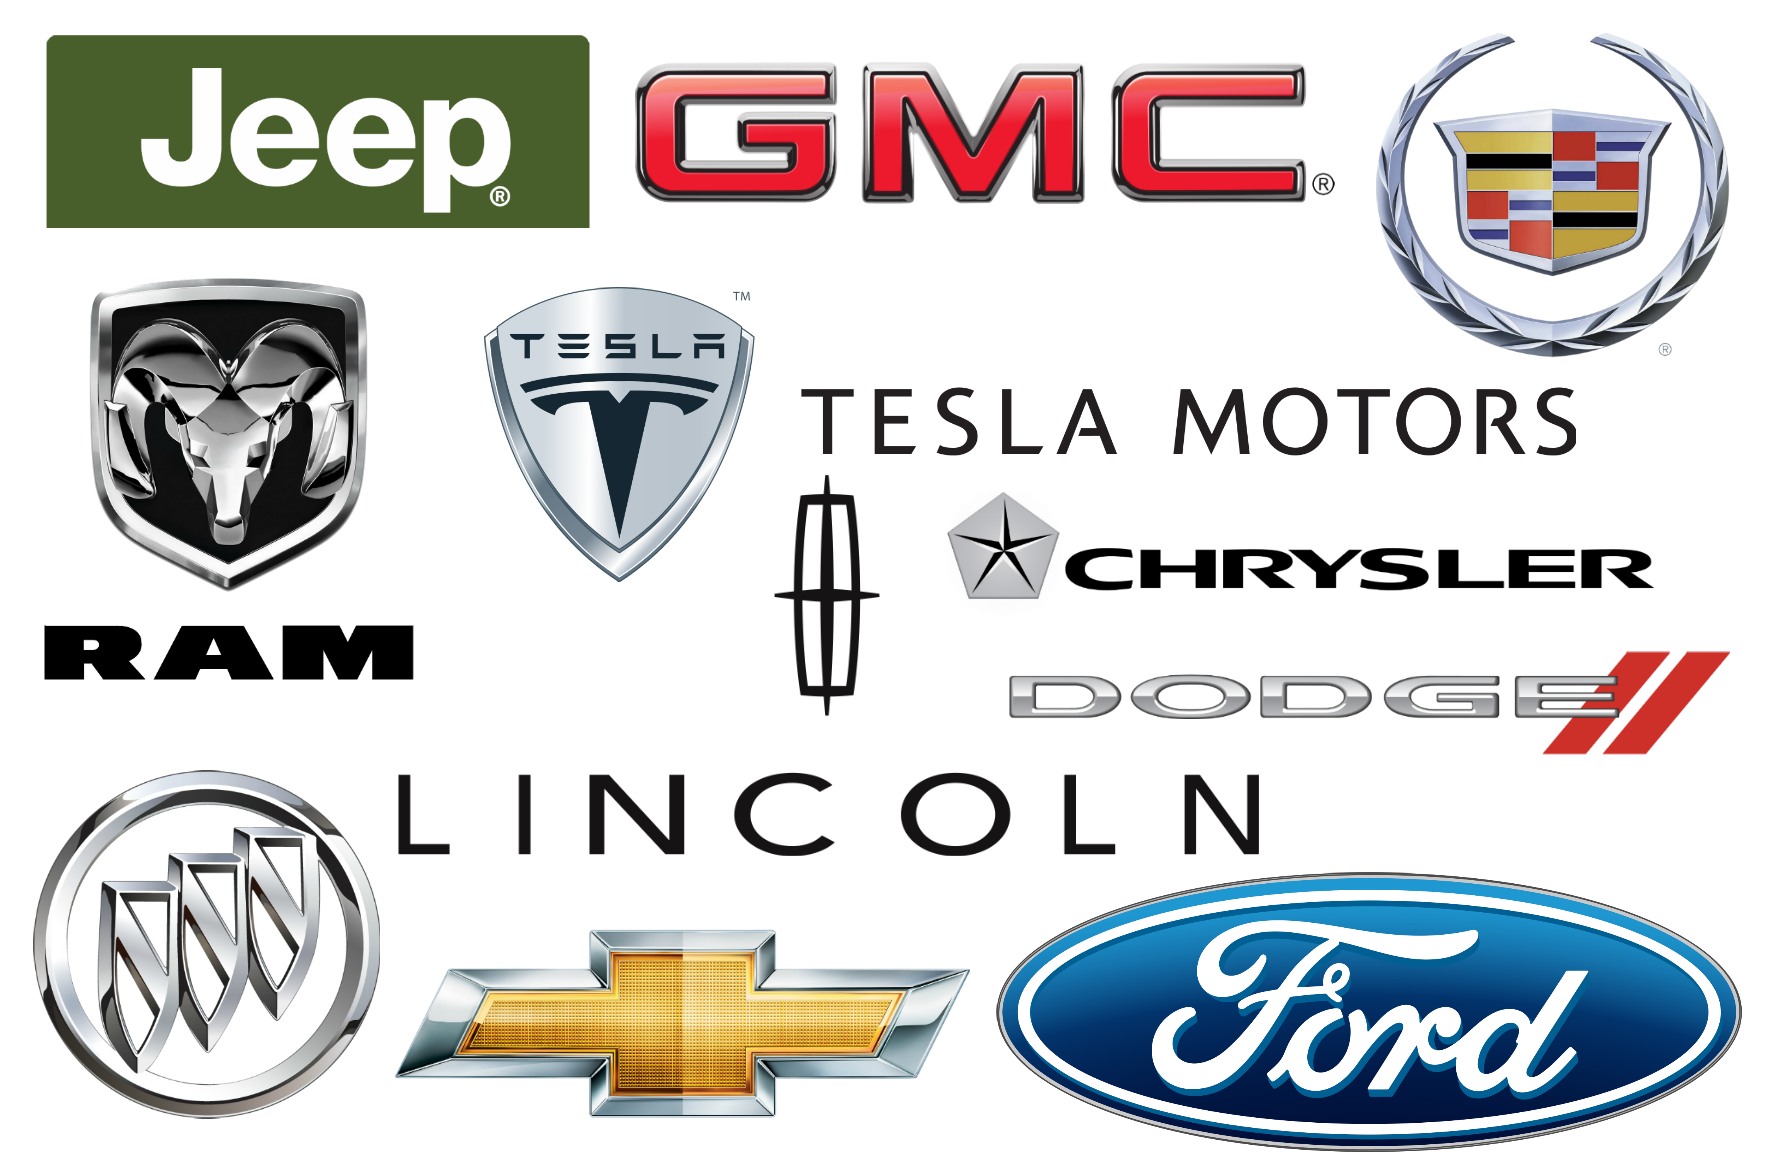 american based multinational automaker